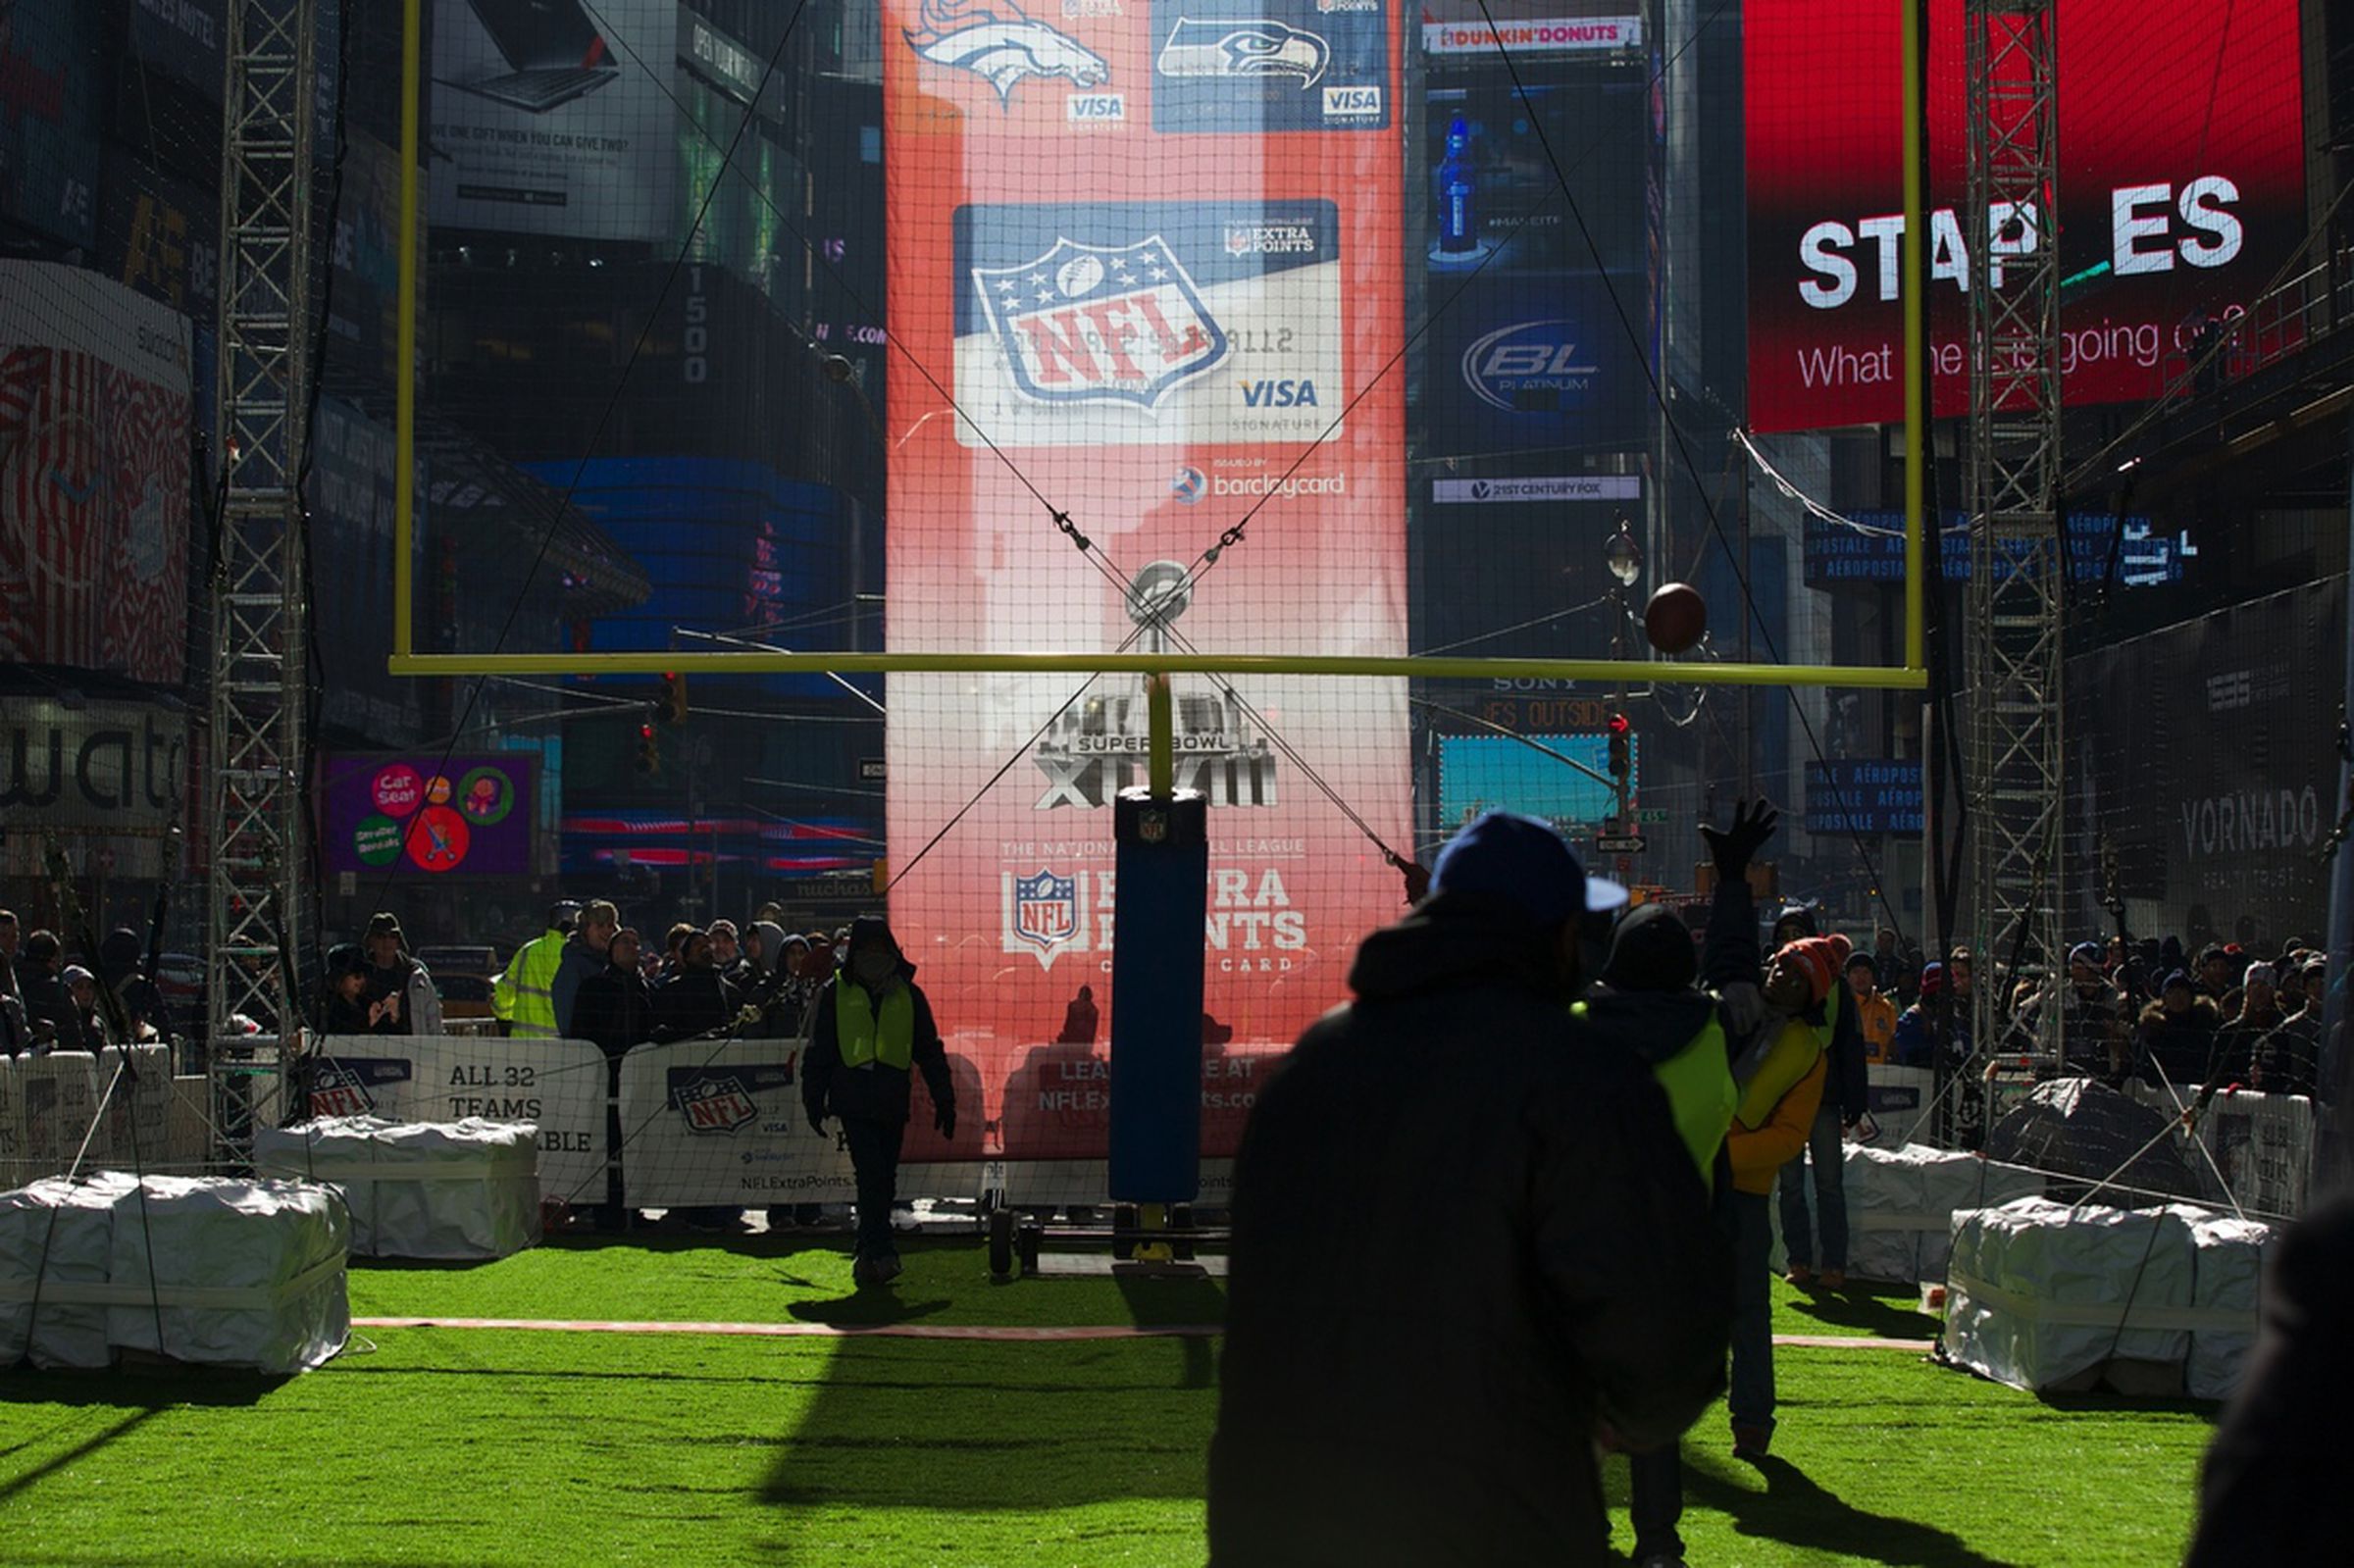 Super Bowl Boulevard in Times Square